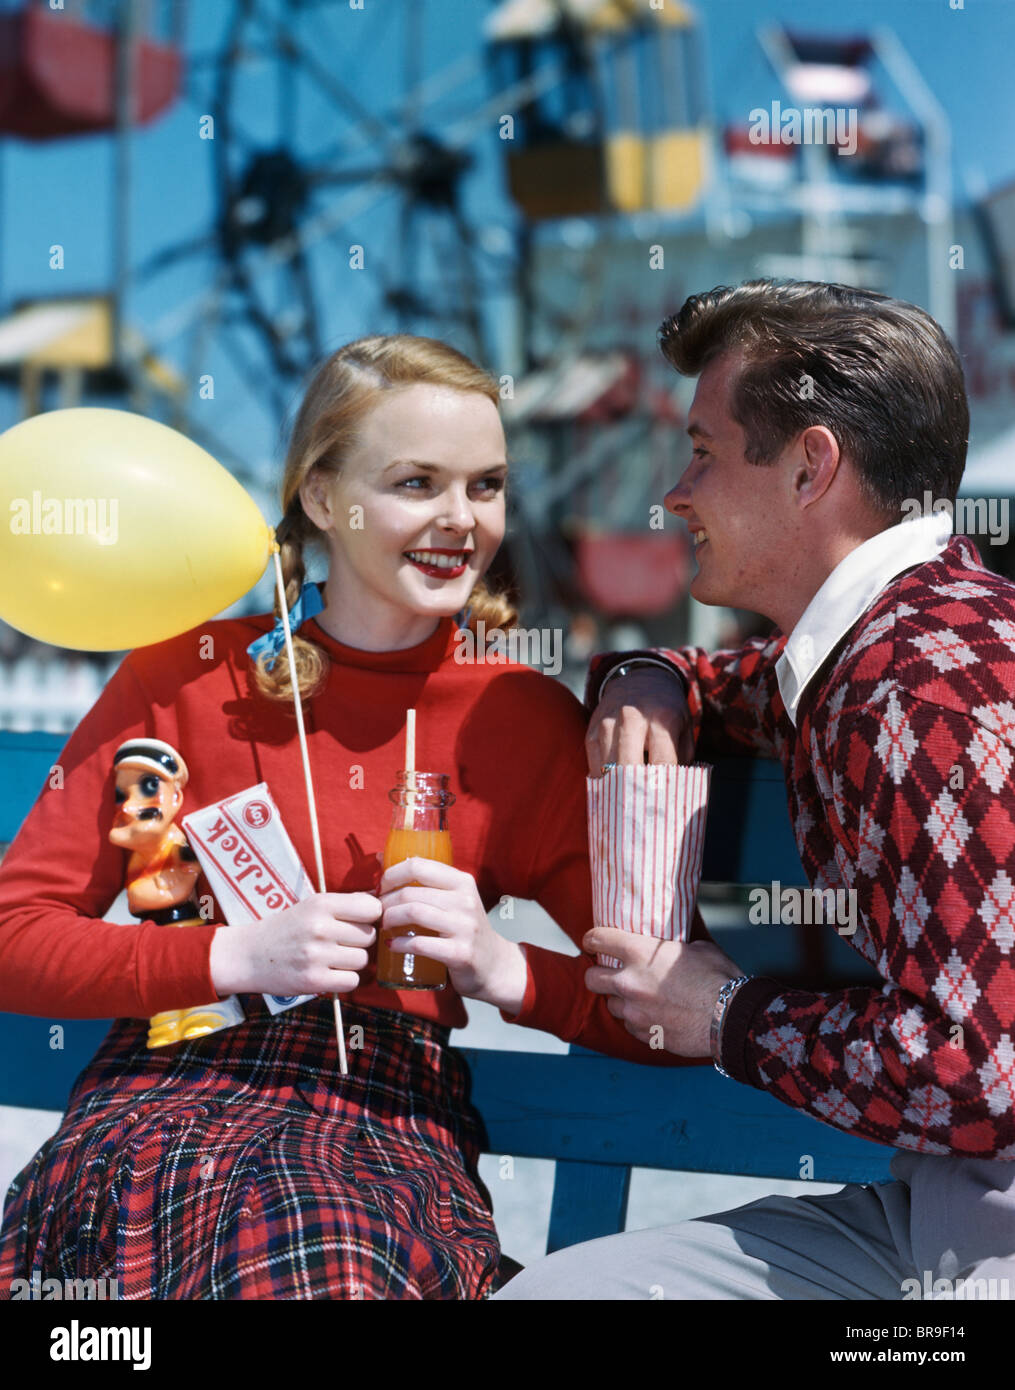 1940s 1950s YOUNG COUPLE AT AMUSEMENT PARK MAN EATING POPCORN WOMAN HOLDING BALLOON AND DRINK AND CRACKERJACK BOX Stock Photo